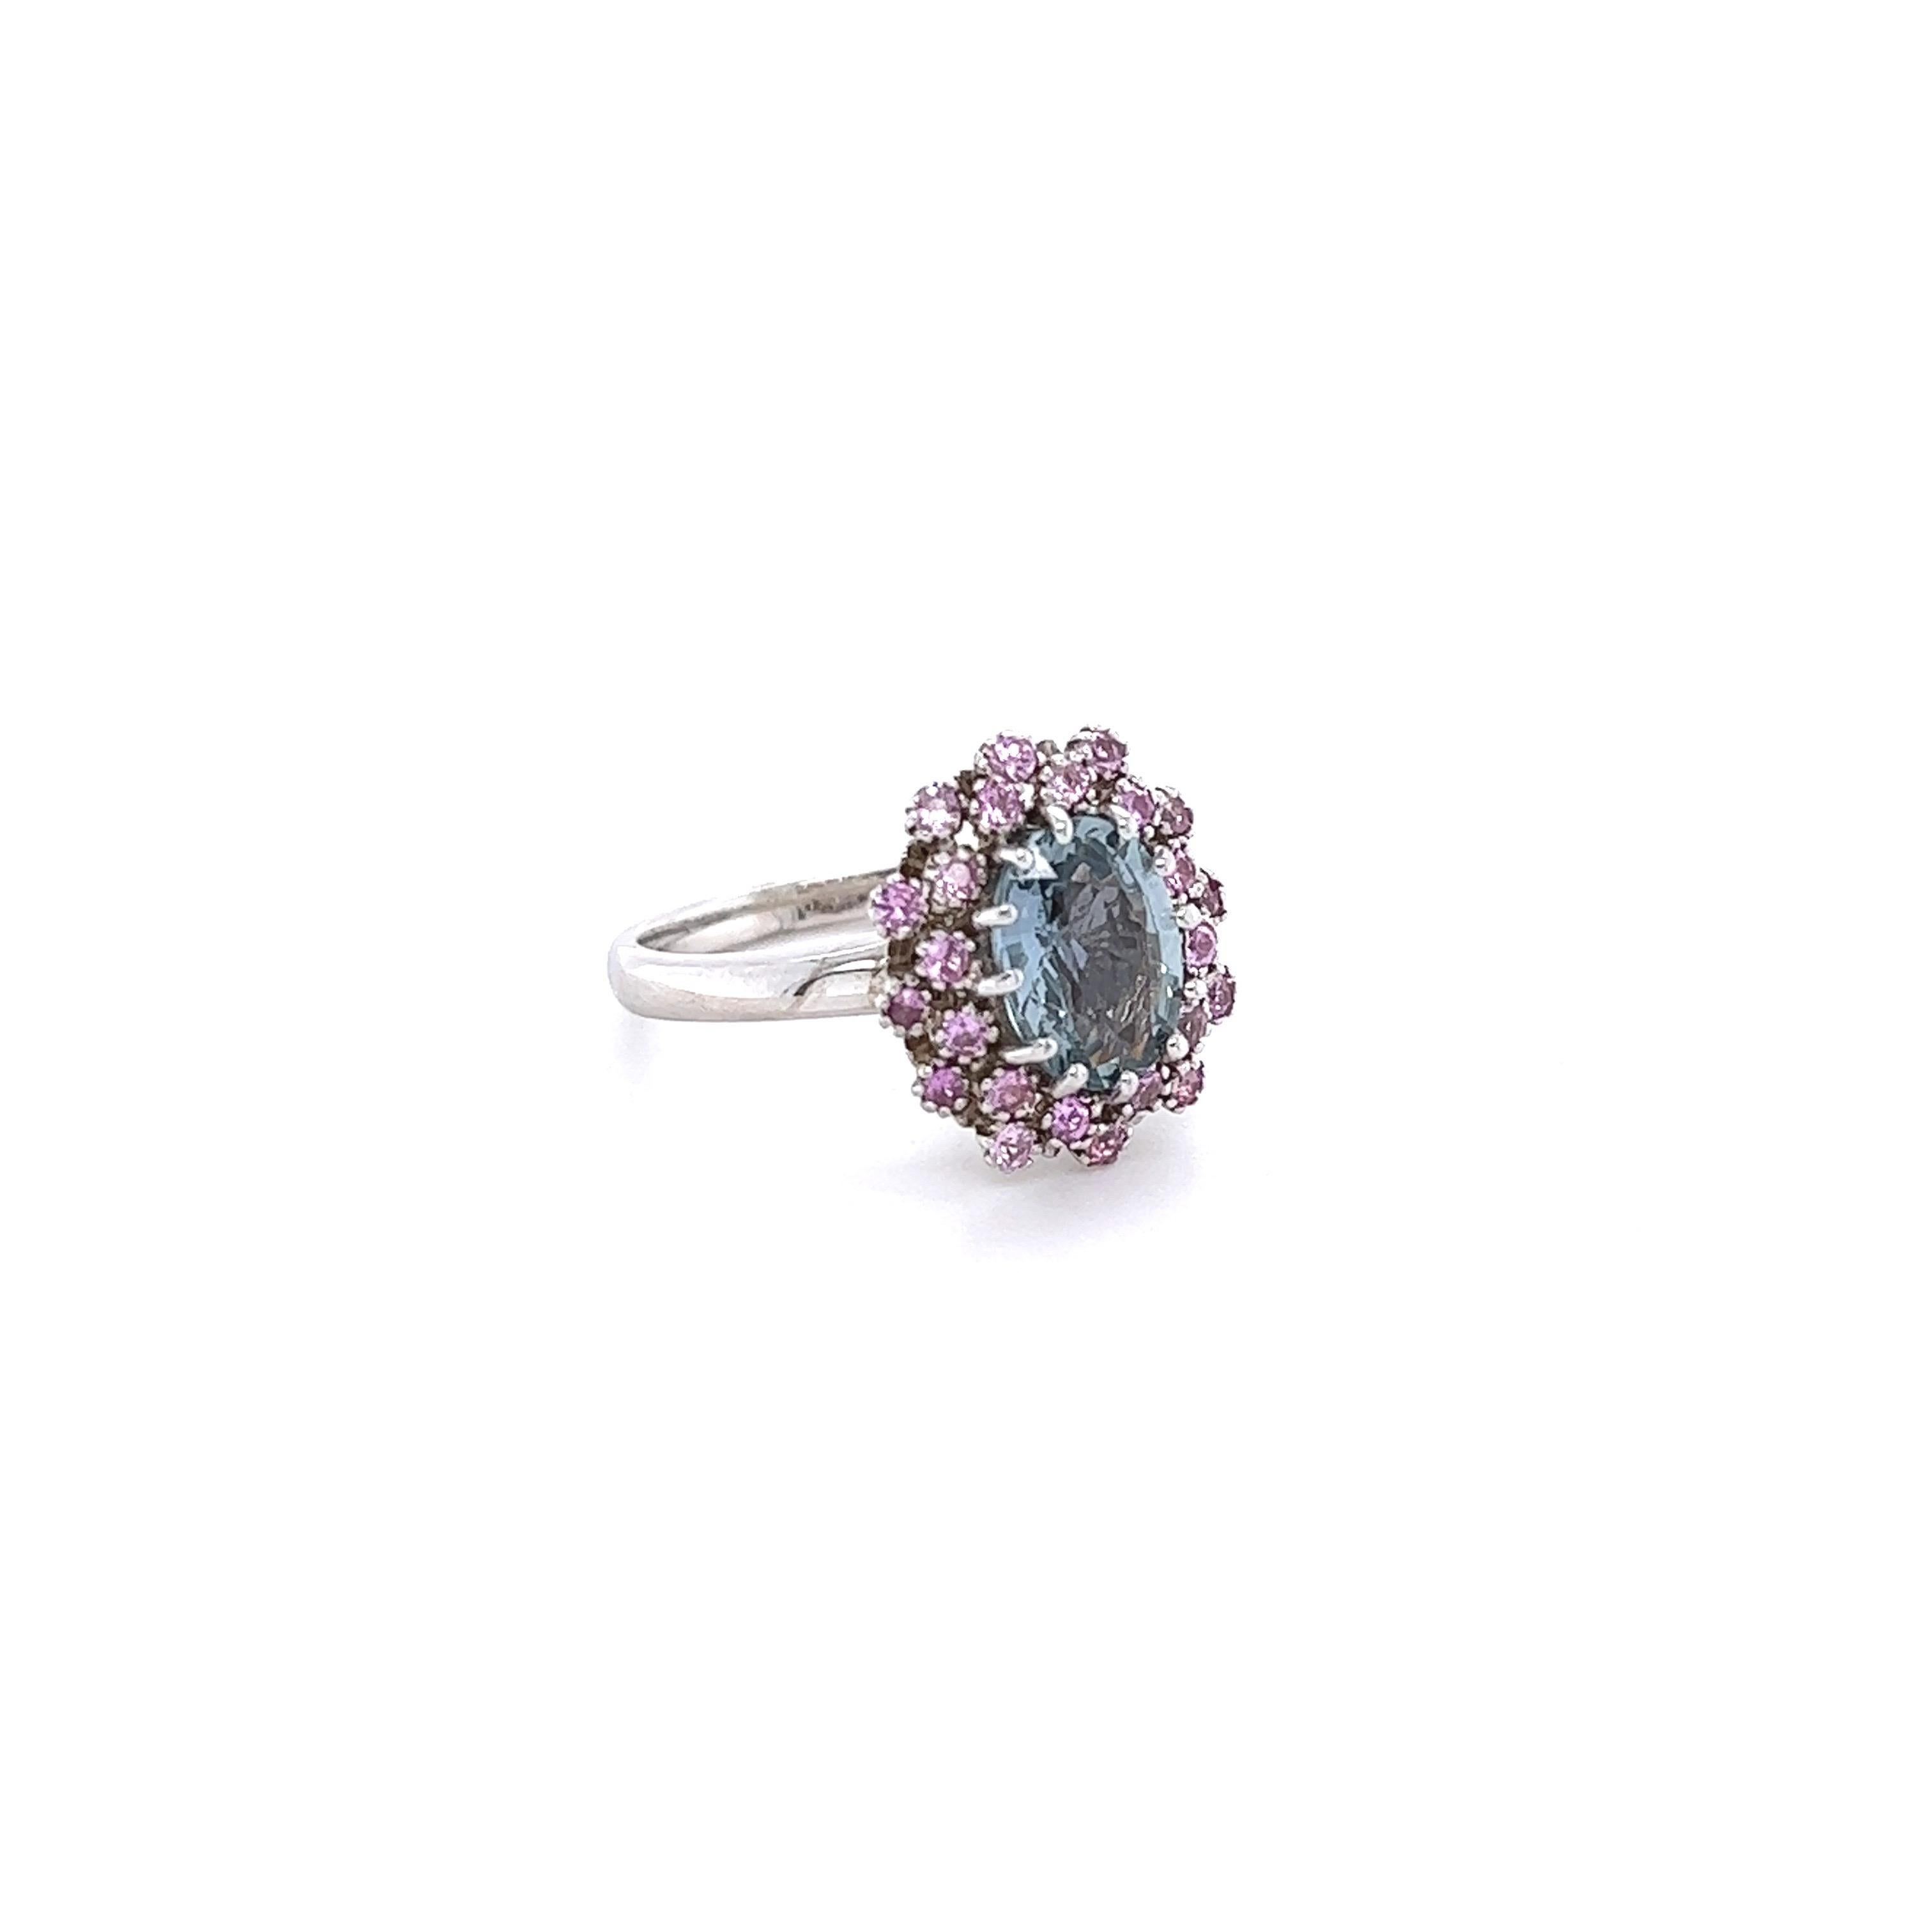 This ring has a Oval Cut Light Blue Sapphire that weighs 2.16 carats and measures at 9 mm x 7 mm. There are 24 Light Pink Sapphires that weigh 0.49 carats. The total carat weight of the ring is 2.65 carats. 

The ring is set in 14 Karat White Gold